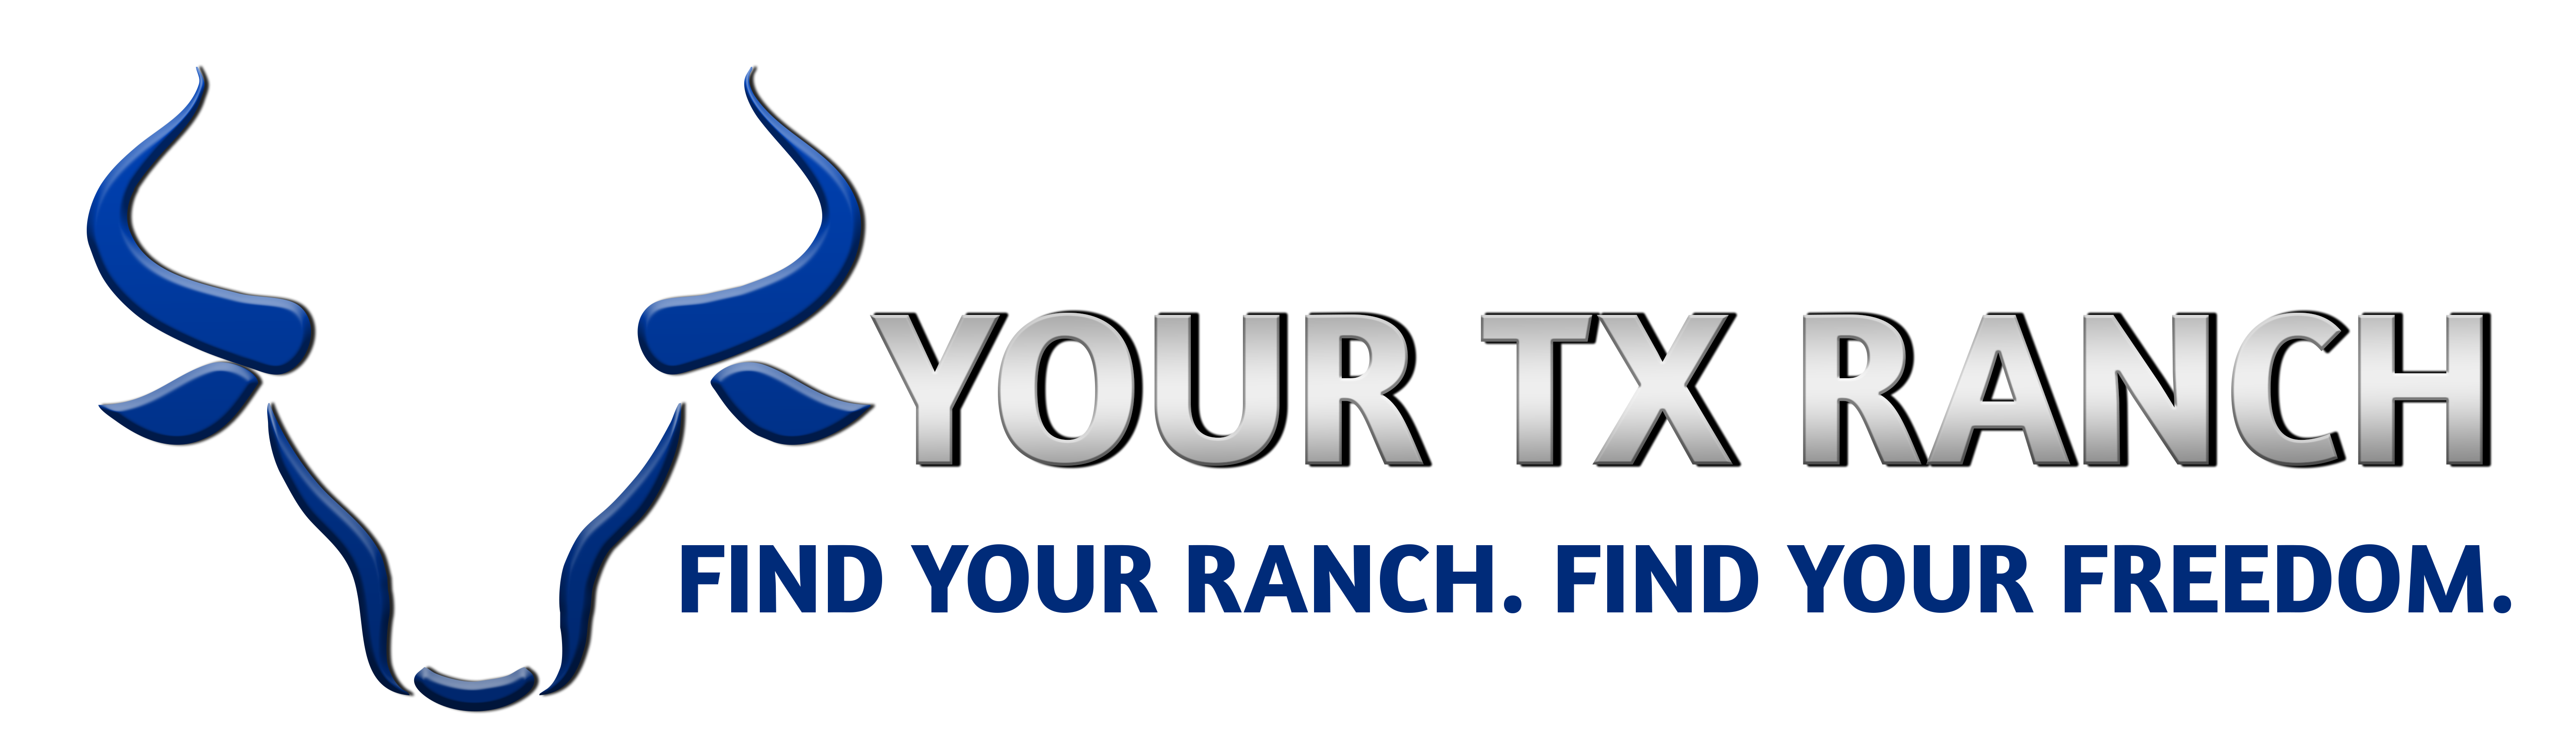 FACEBOOK LANDING PAGE – YOUR TX RANCH